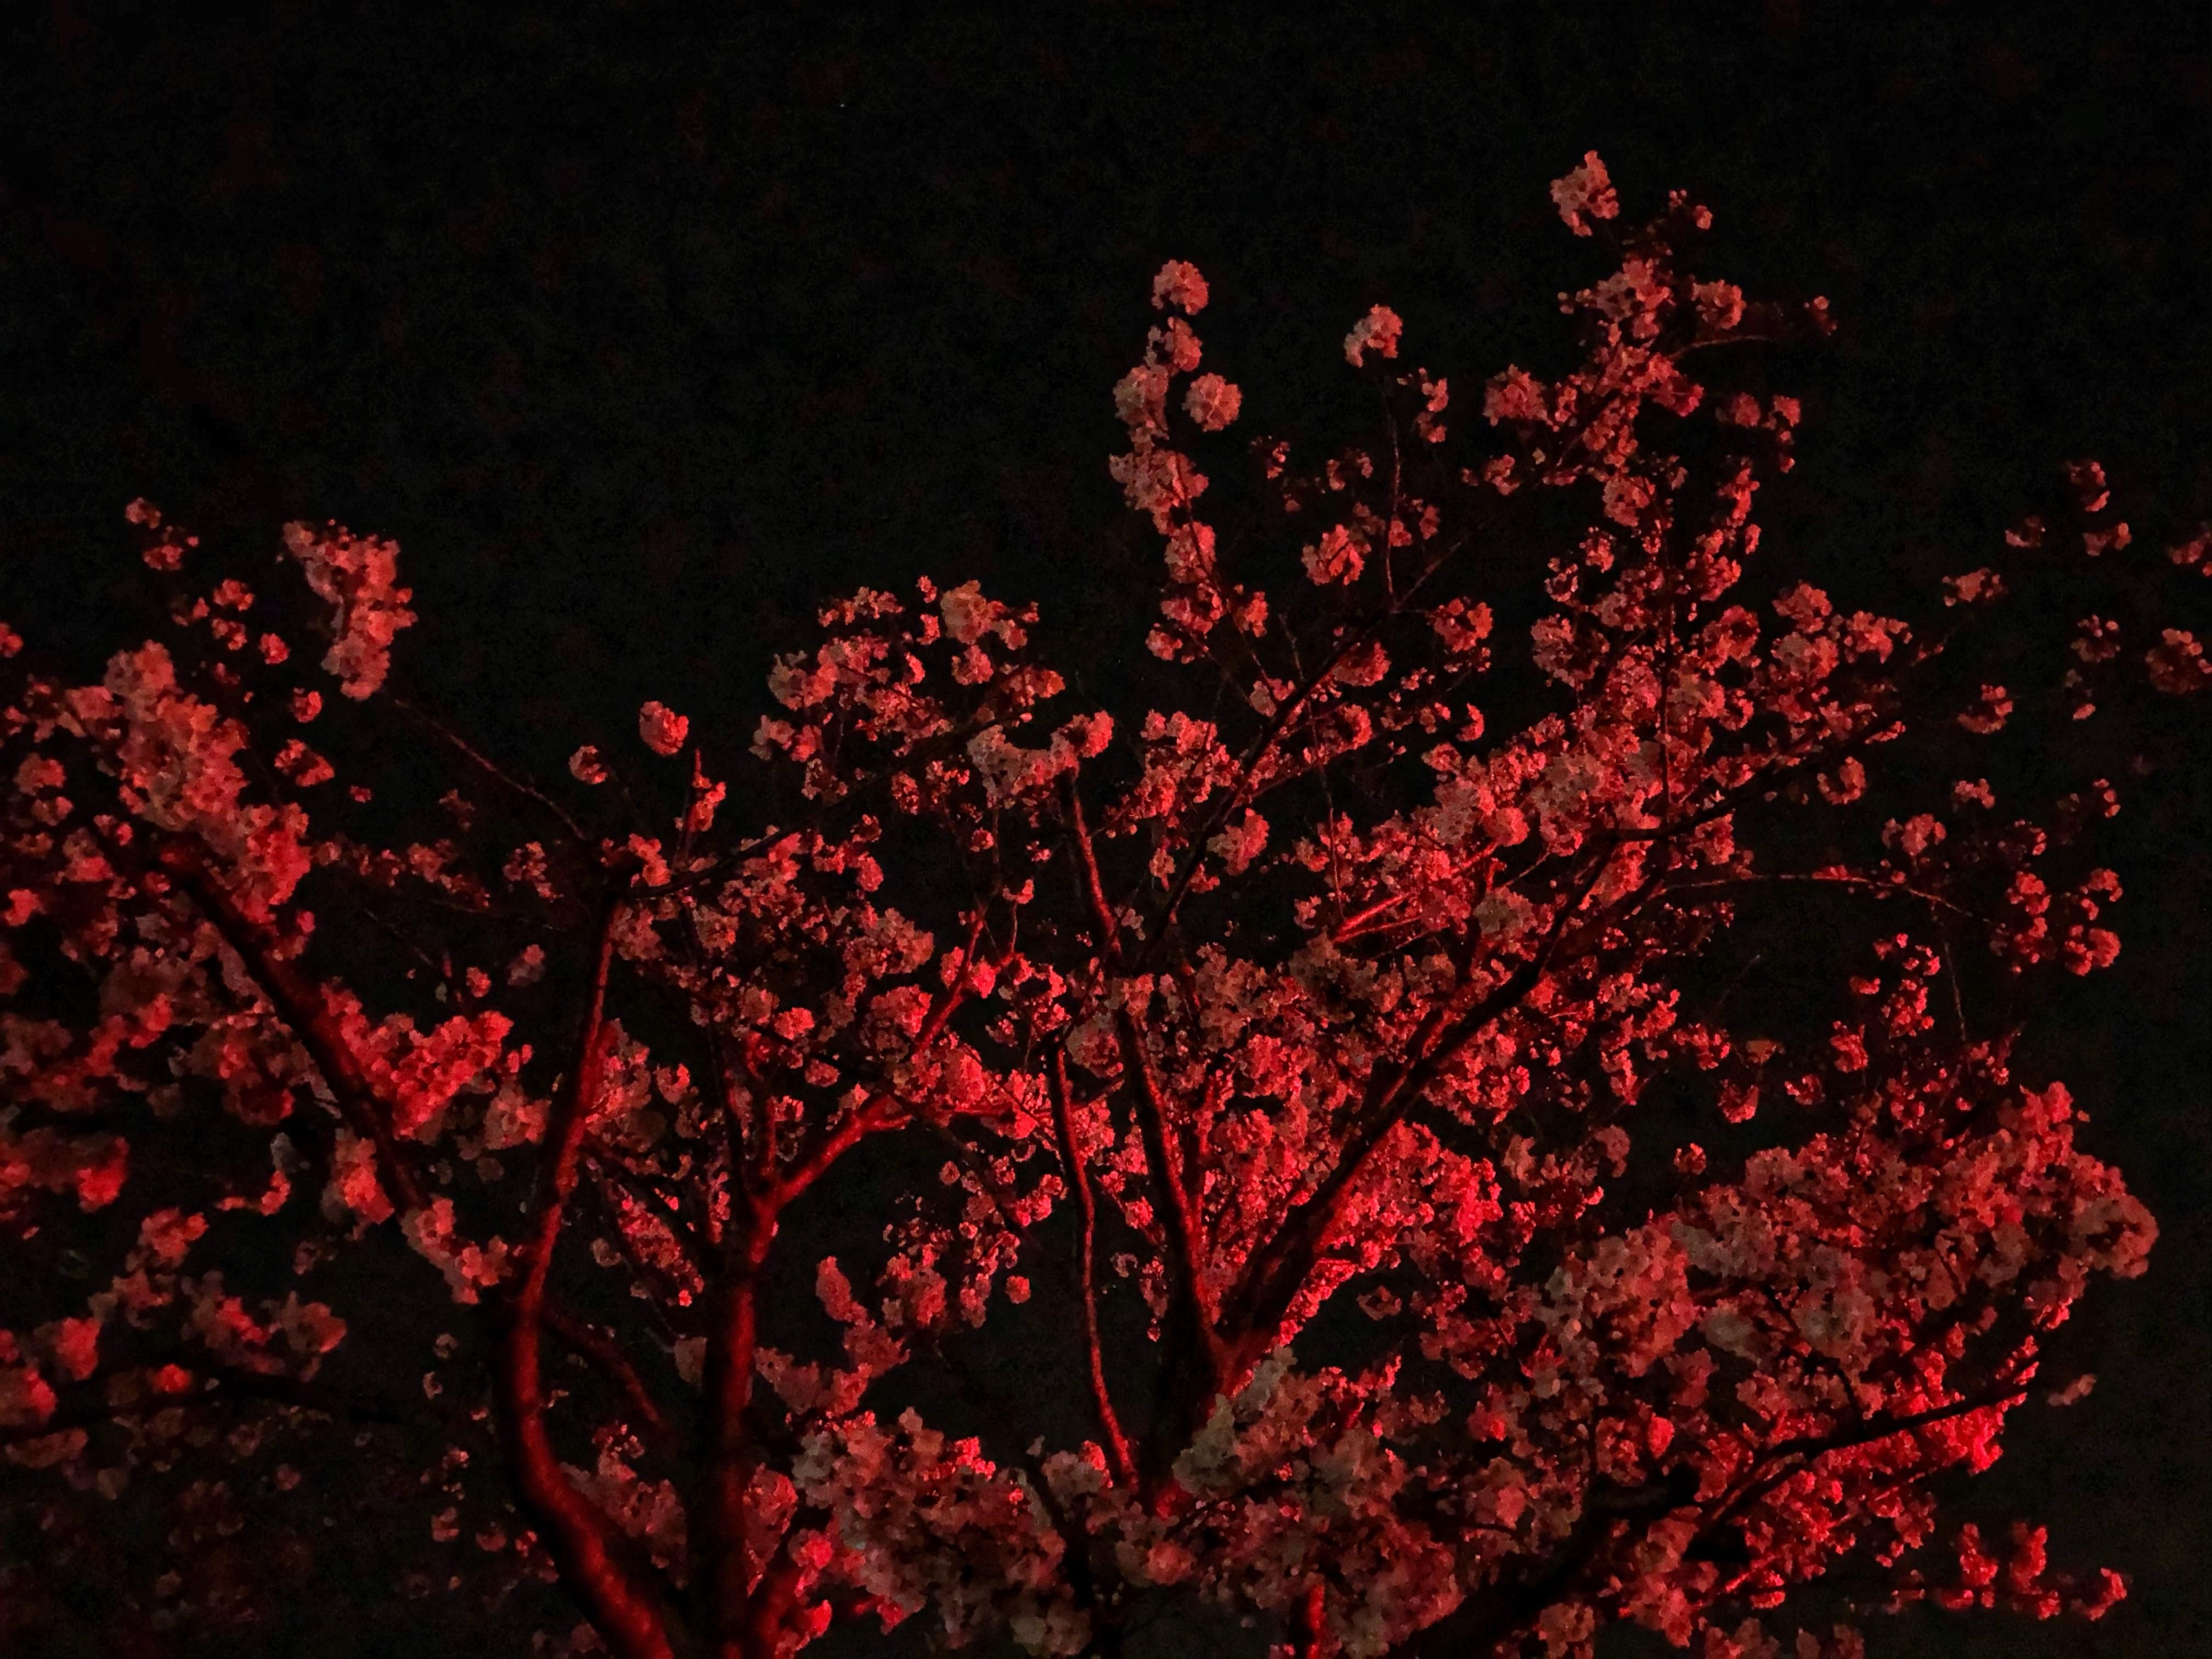 A red traffic light was lighting up this cherry blossom tree [OC 4032x3024